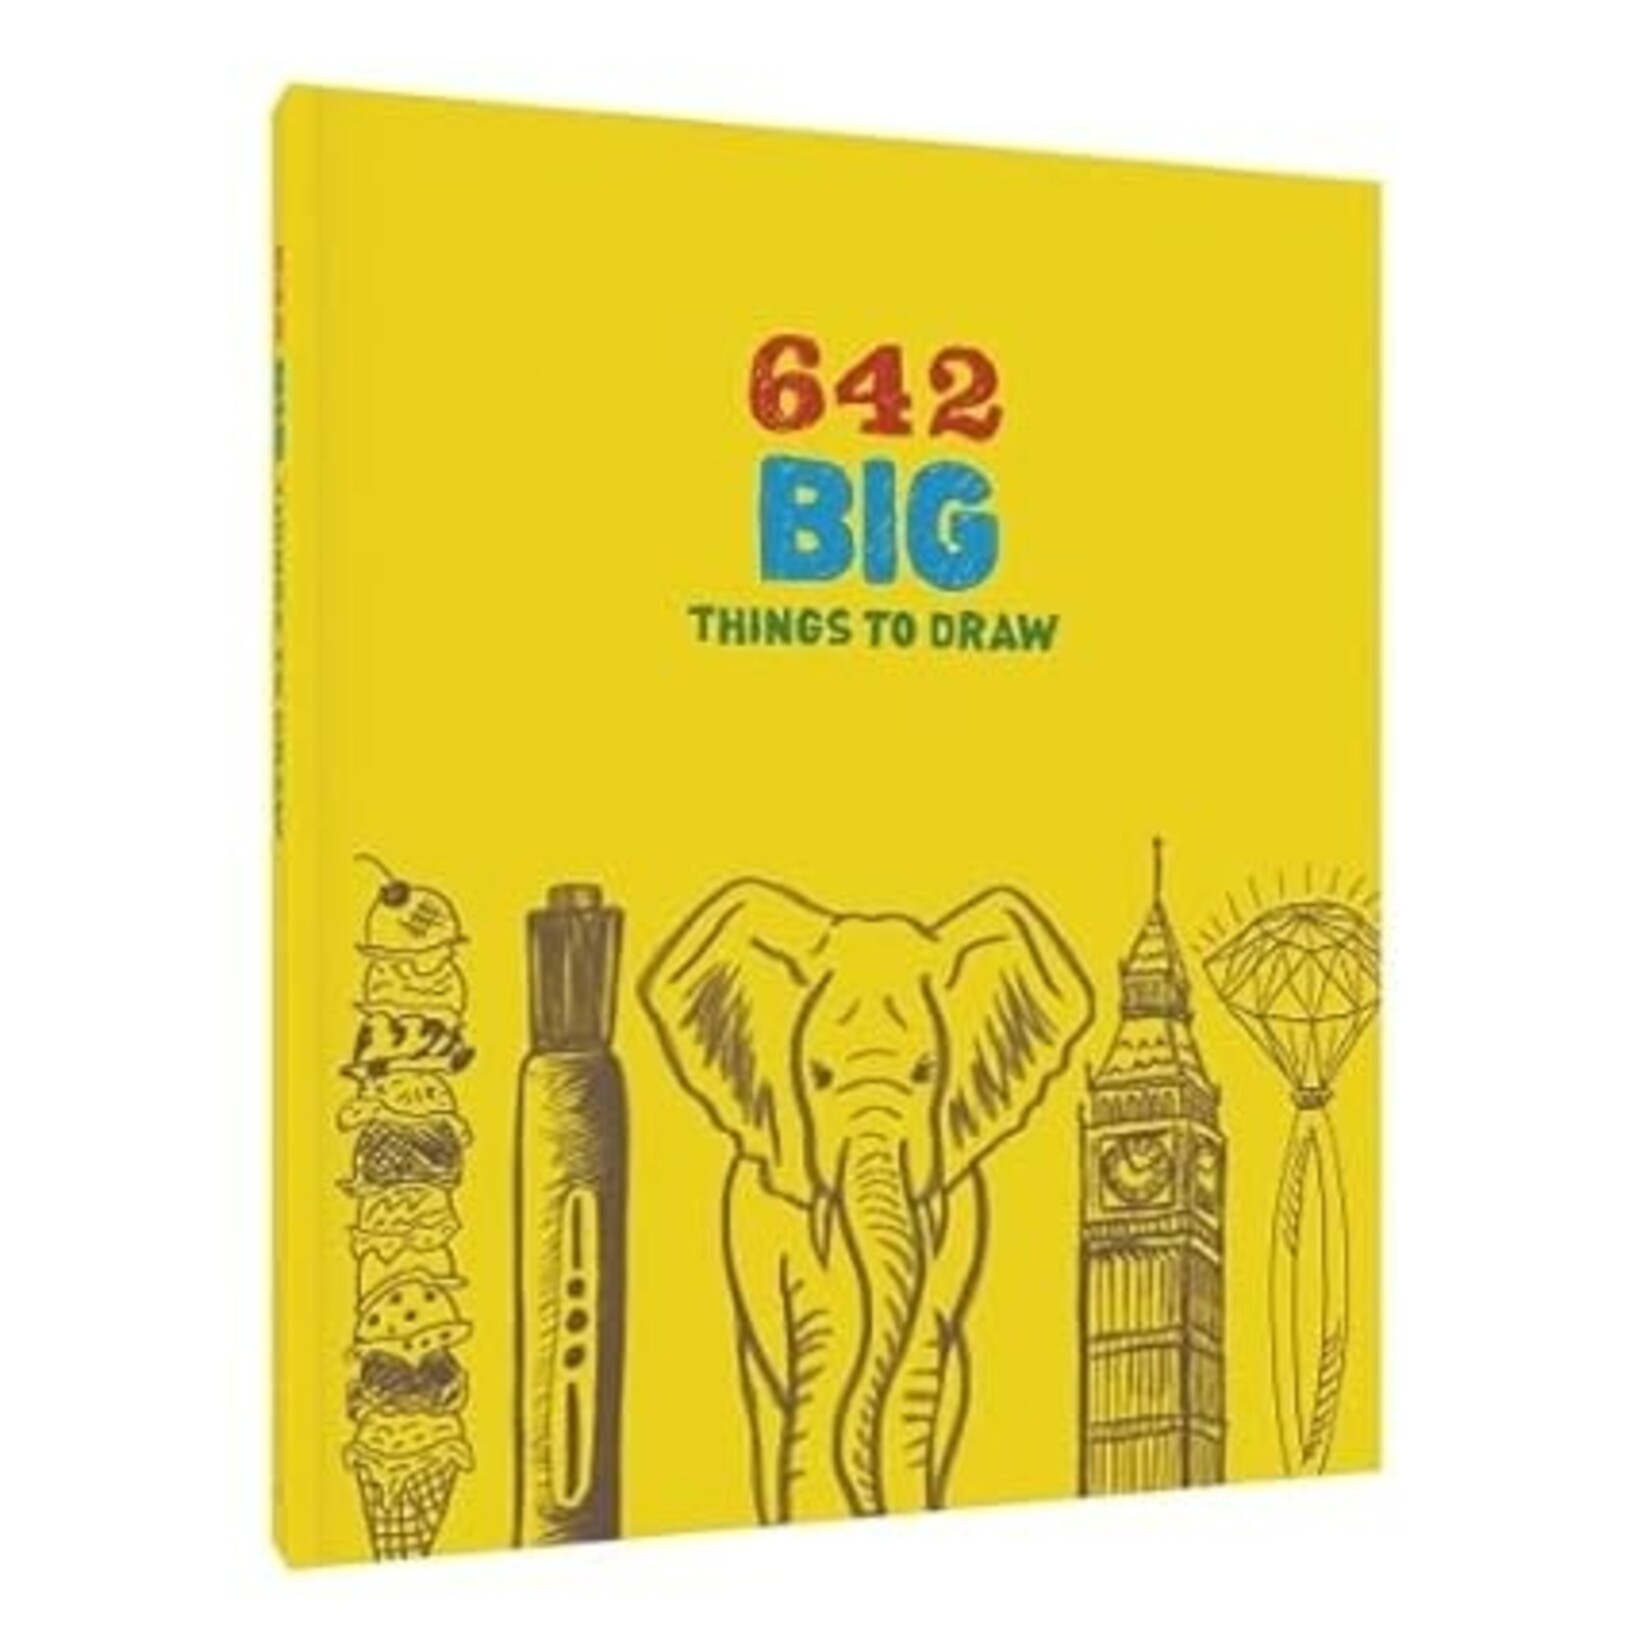 Hachette Book Group 642 BIG Things to Draw